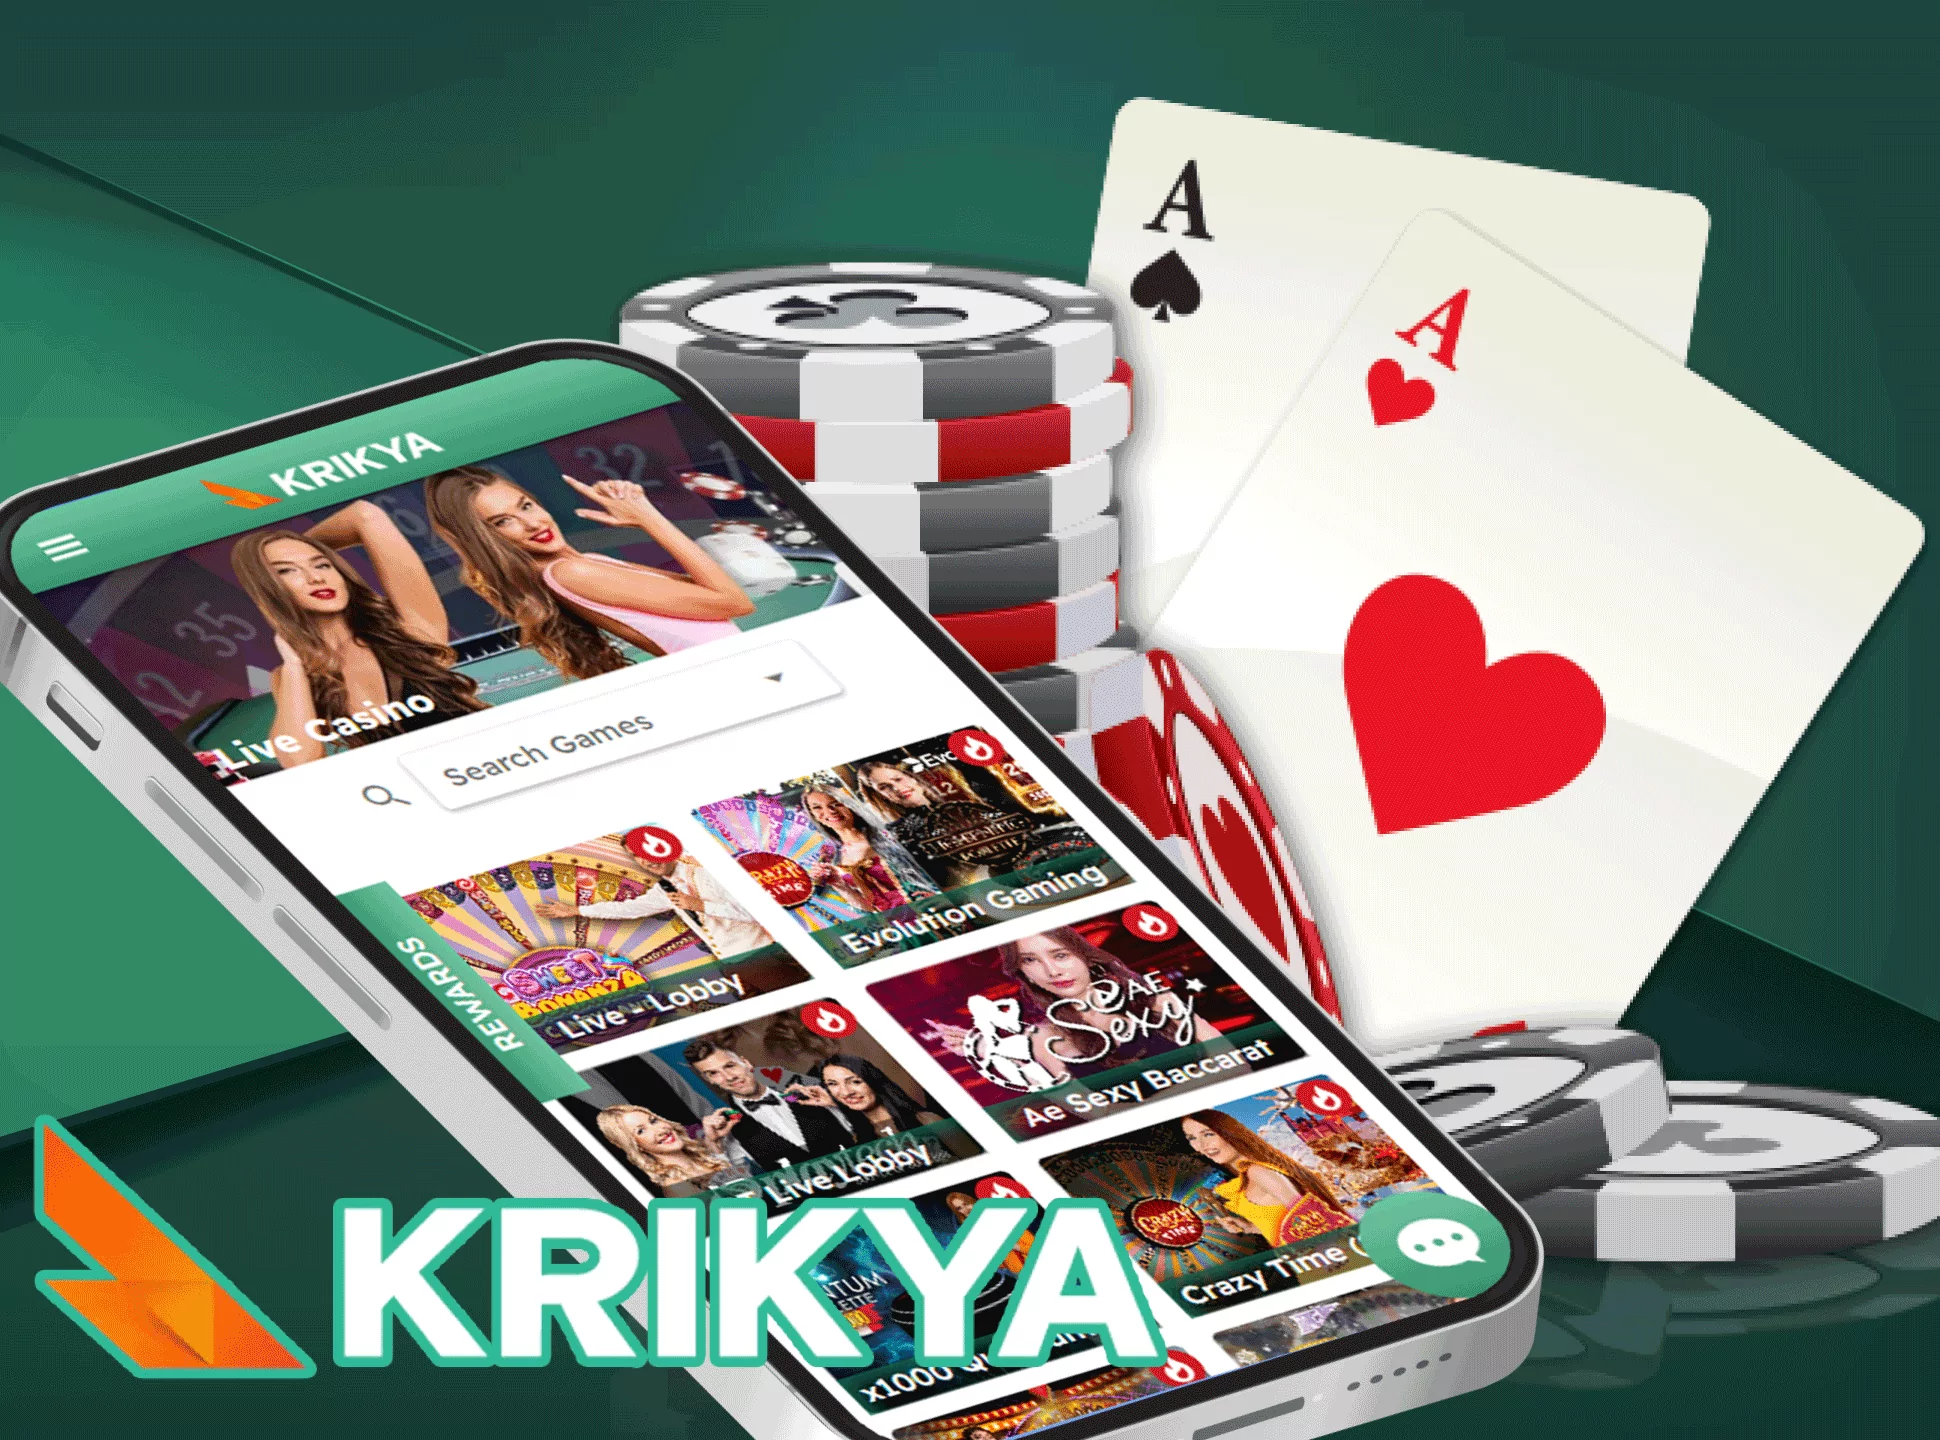 Play different types of games such as poker, baccarat, blackjack and other in the Krikya mobile app.